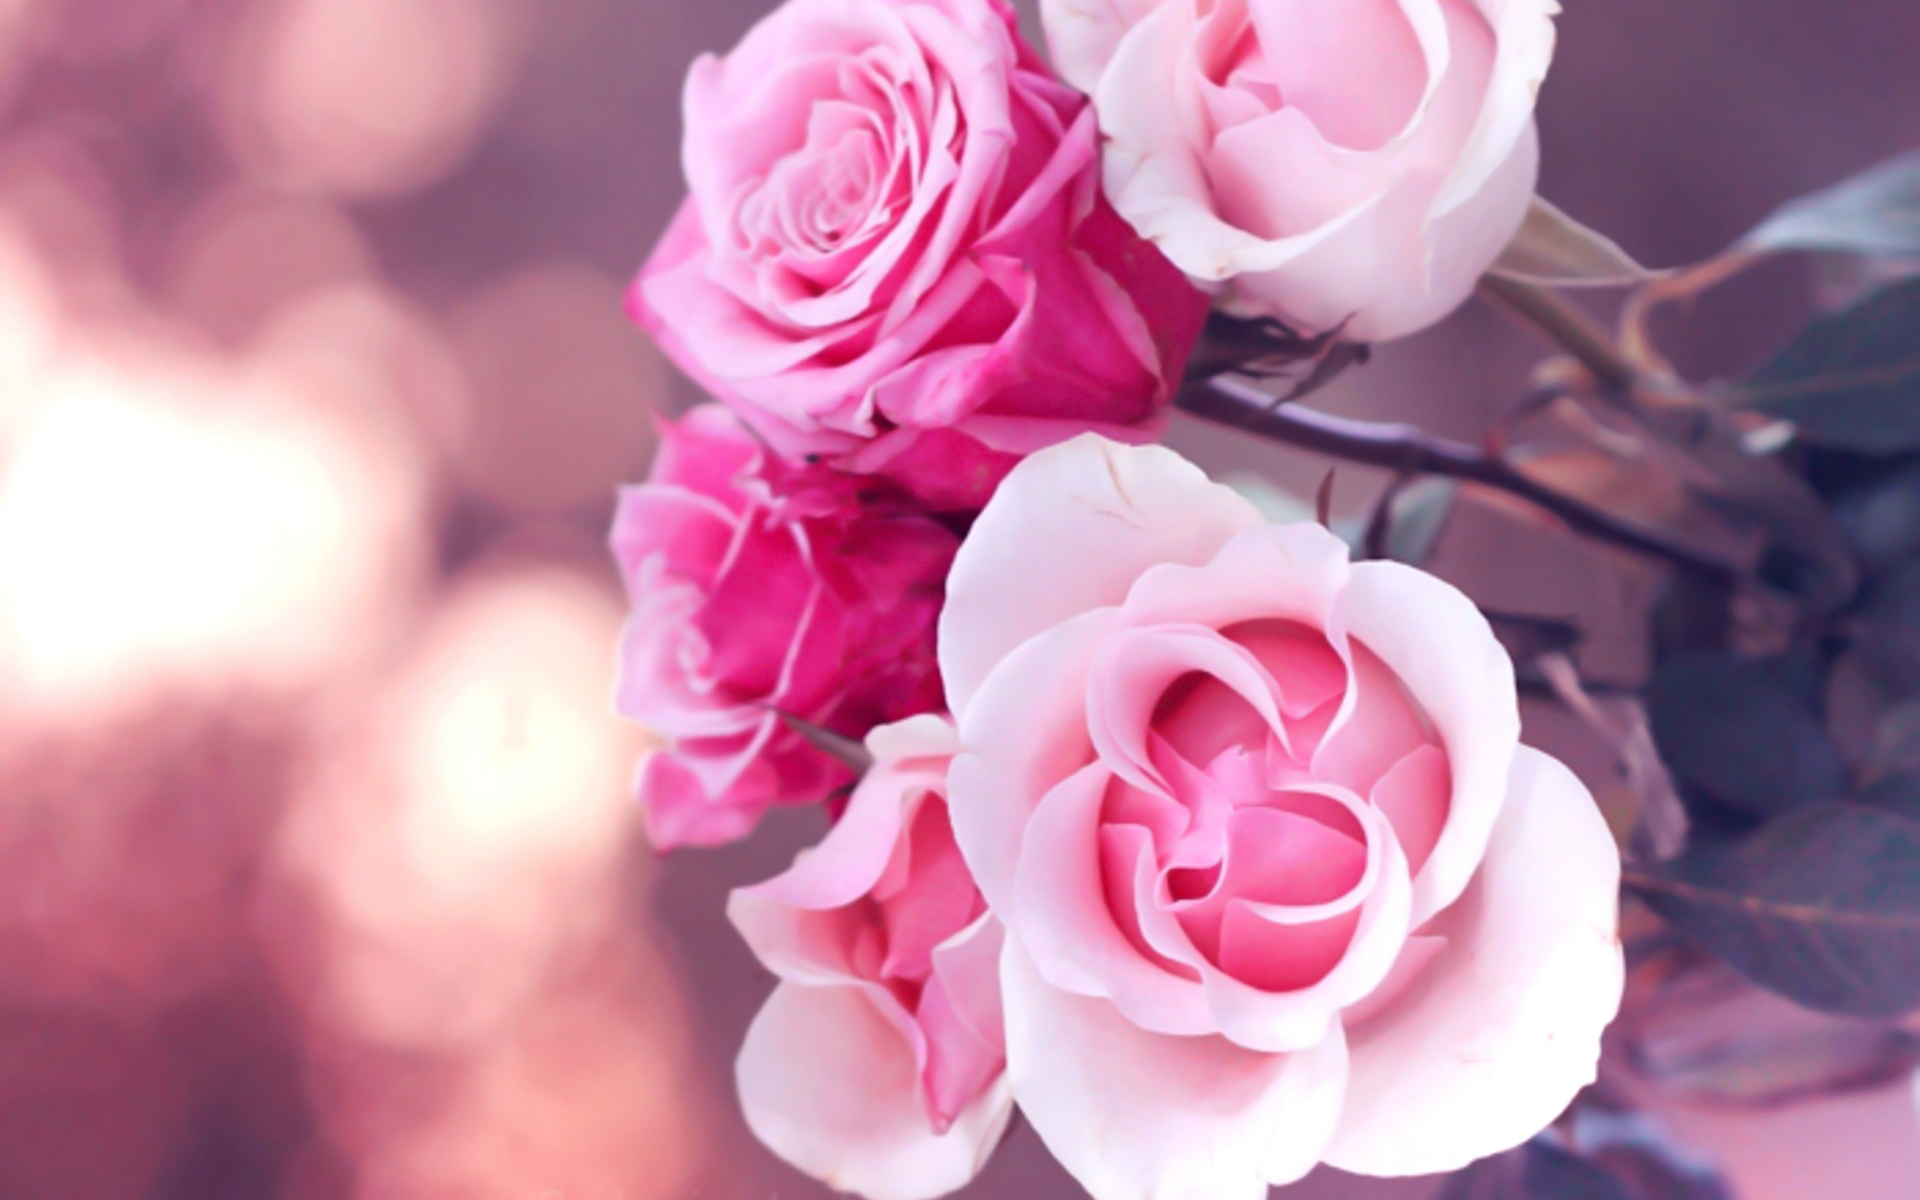 Pink Roses Picture - Wallpaper, High Definition, High Quality, Widescreen